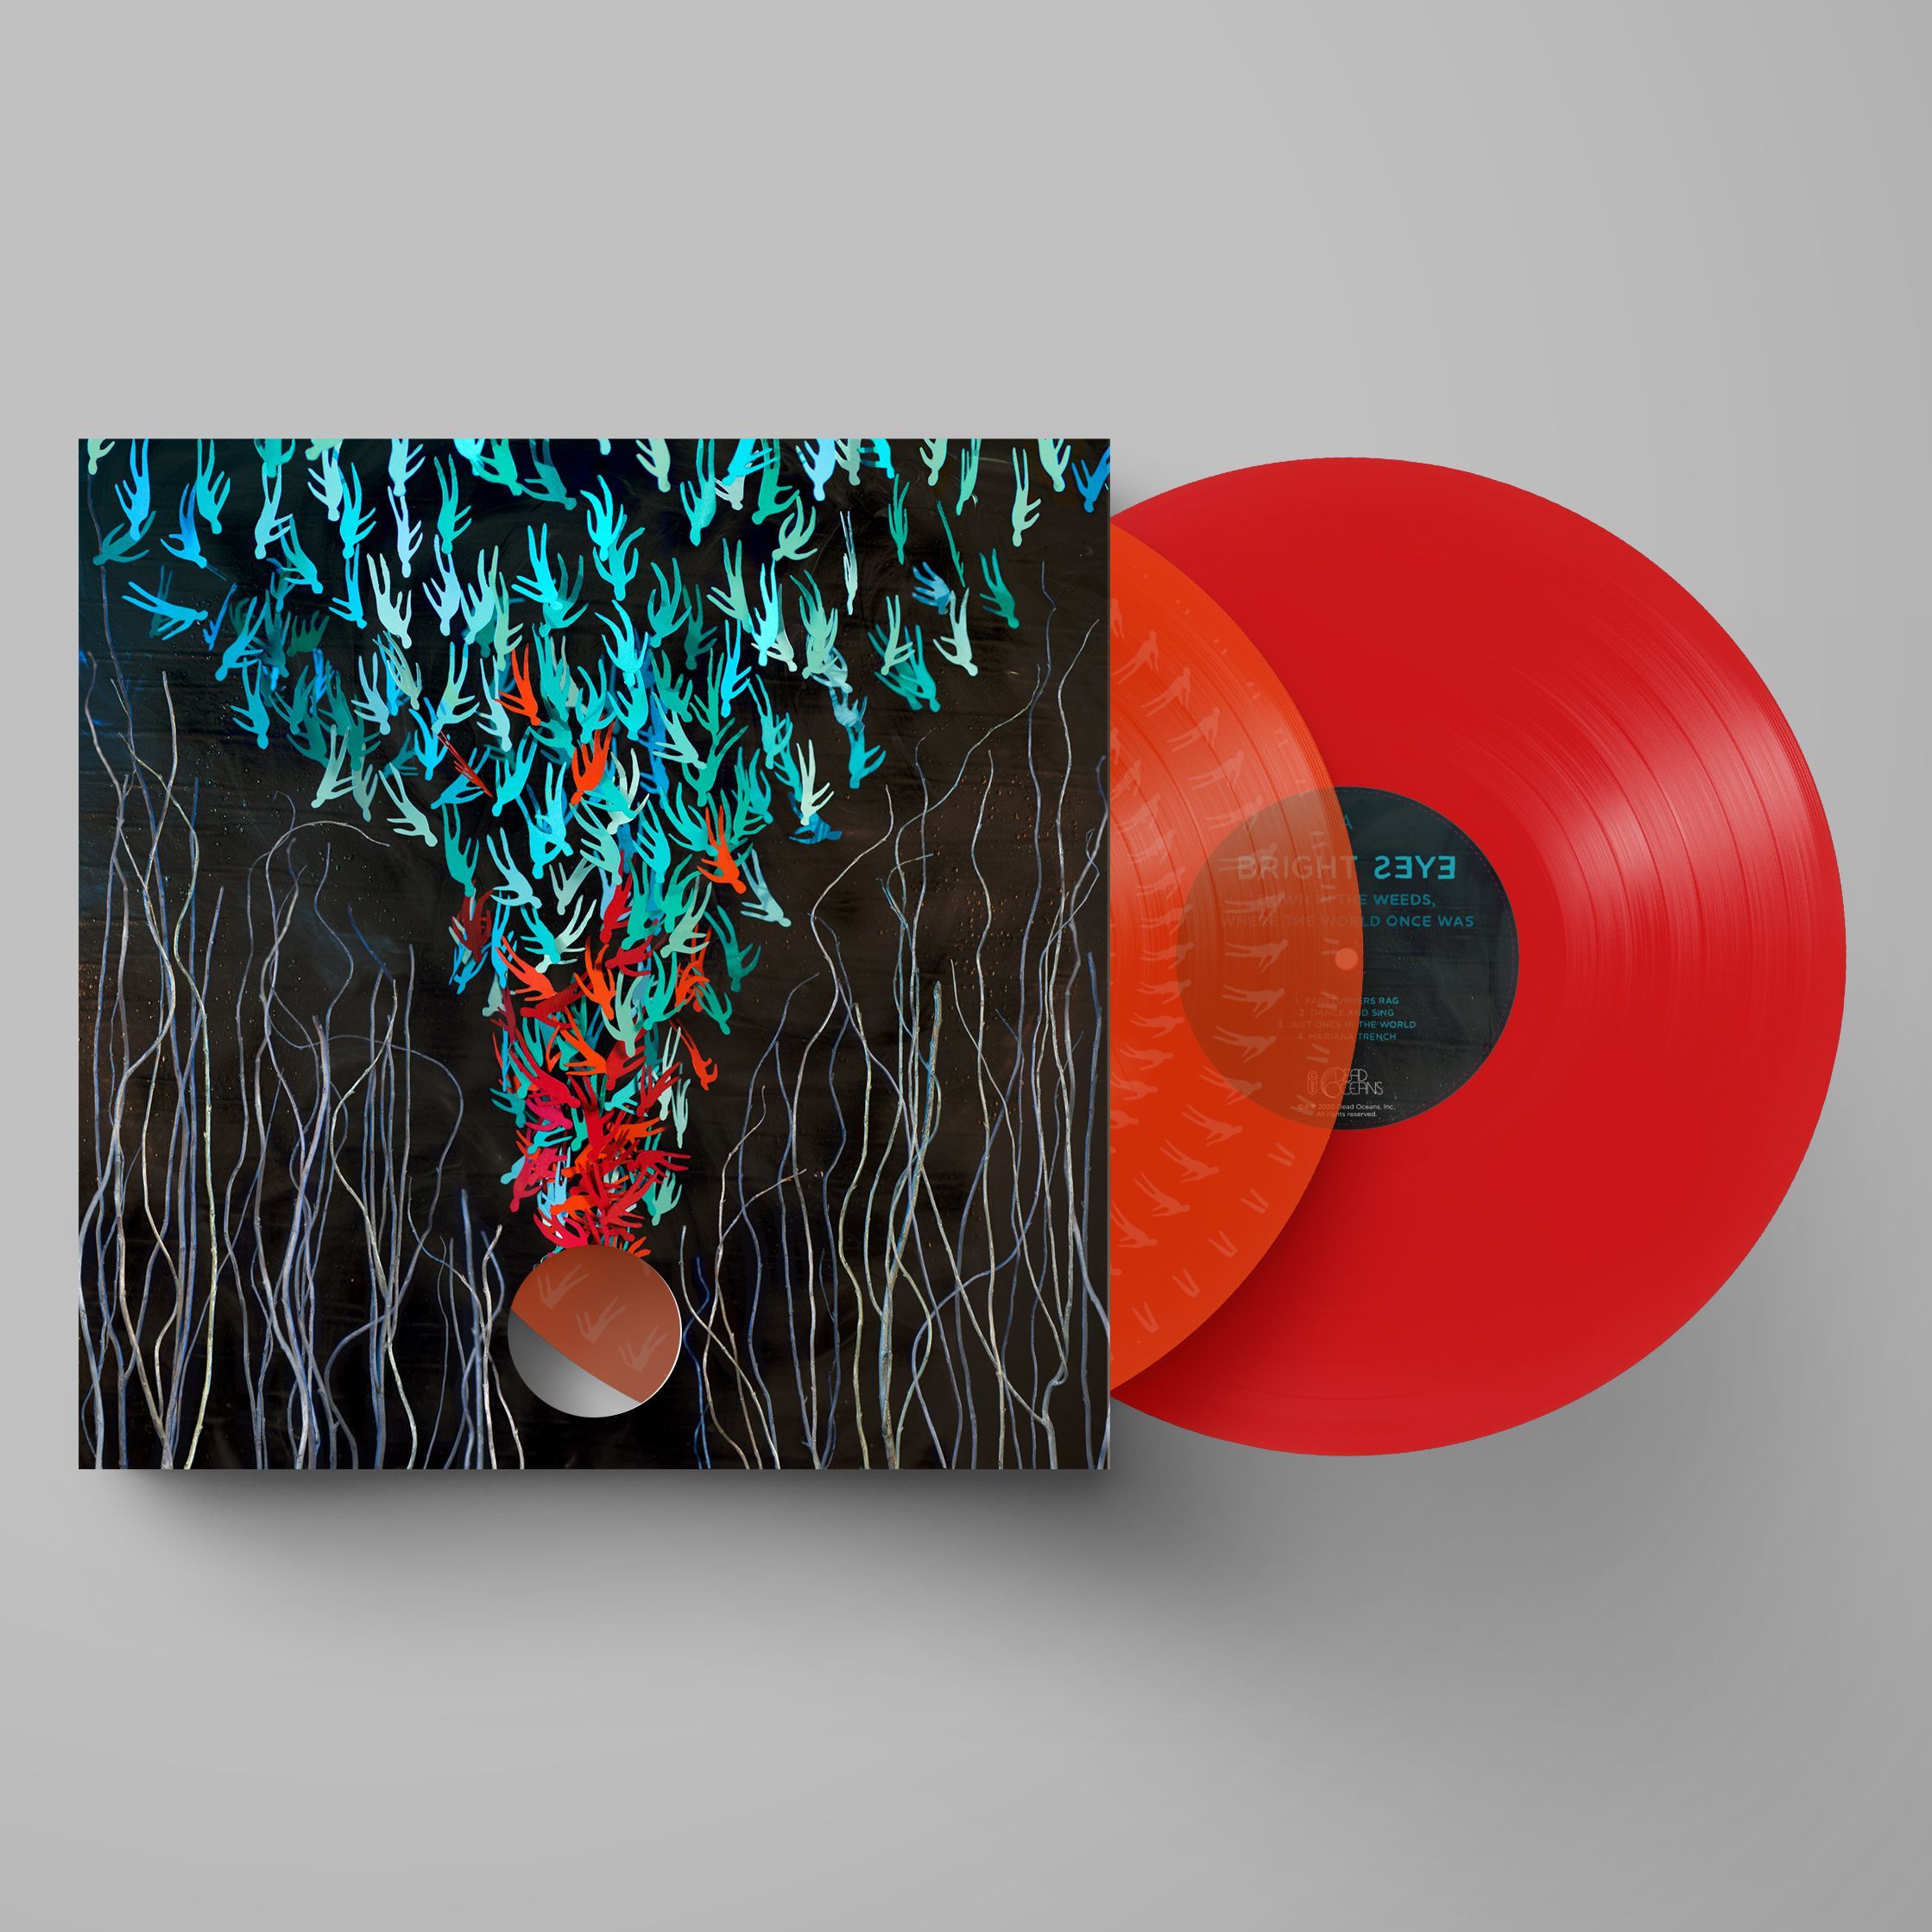 Bright Eyes - Down in the Weeds, Where the World Once Was: Limited Transparent Orange + Red Vinyl 2LP